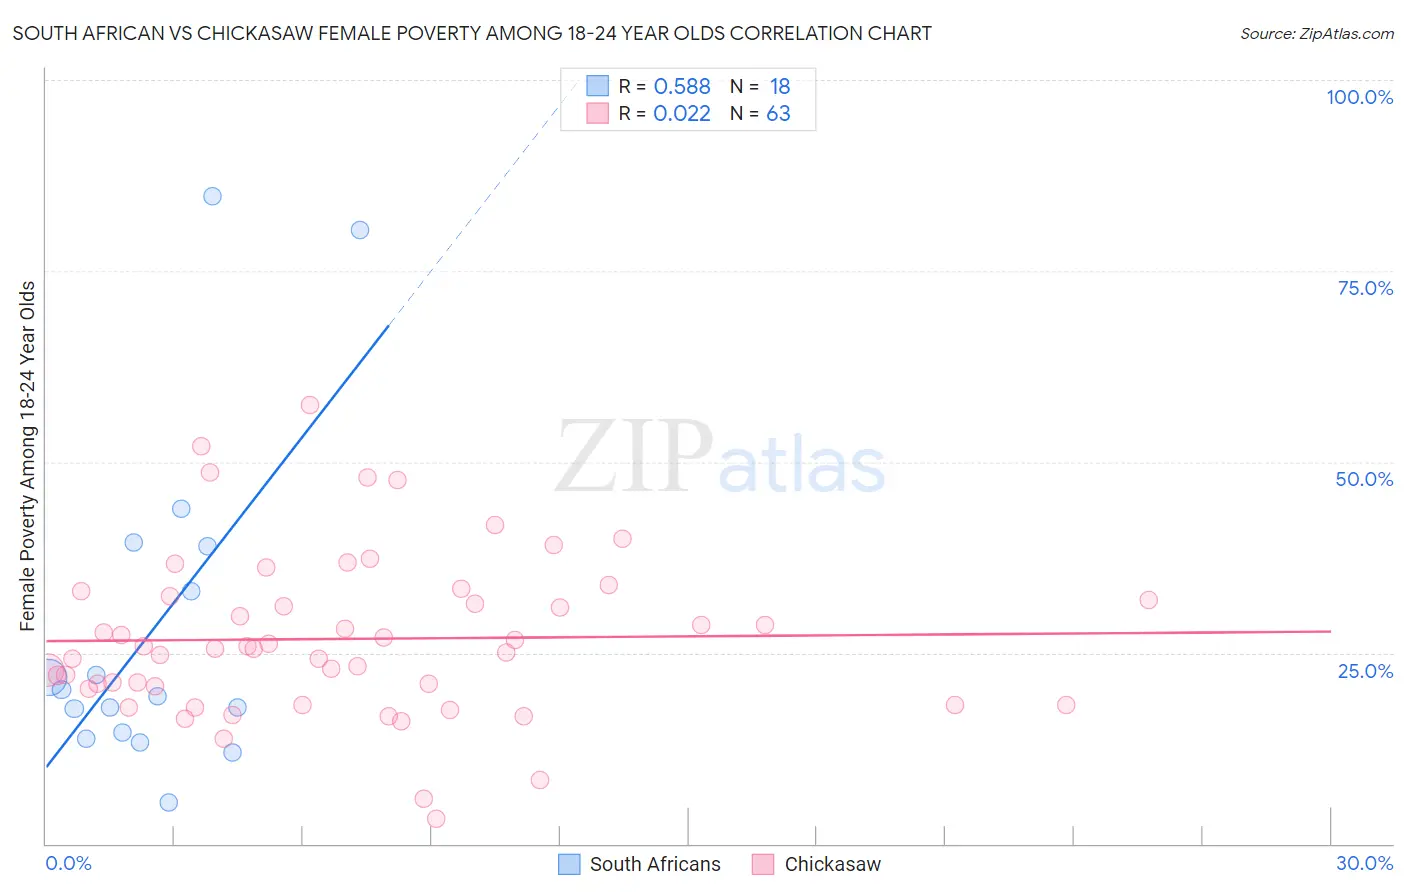 South African vs Chickasaw Female Poverty Among 18-24 Year Olds